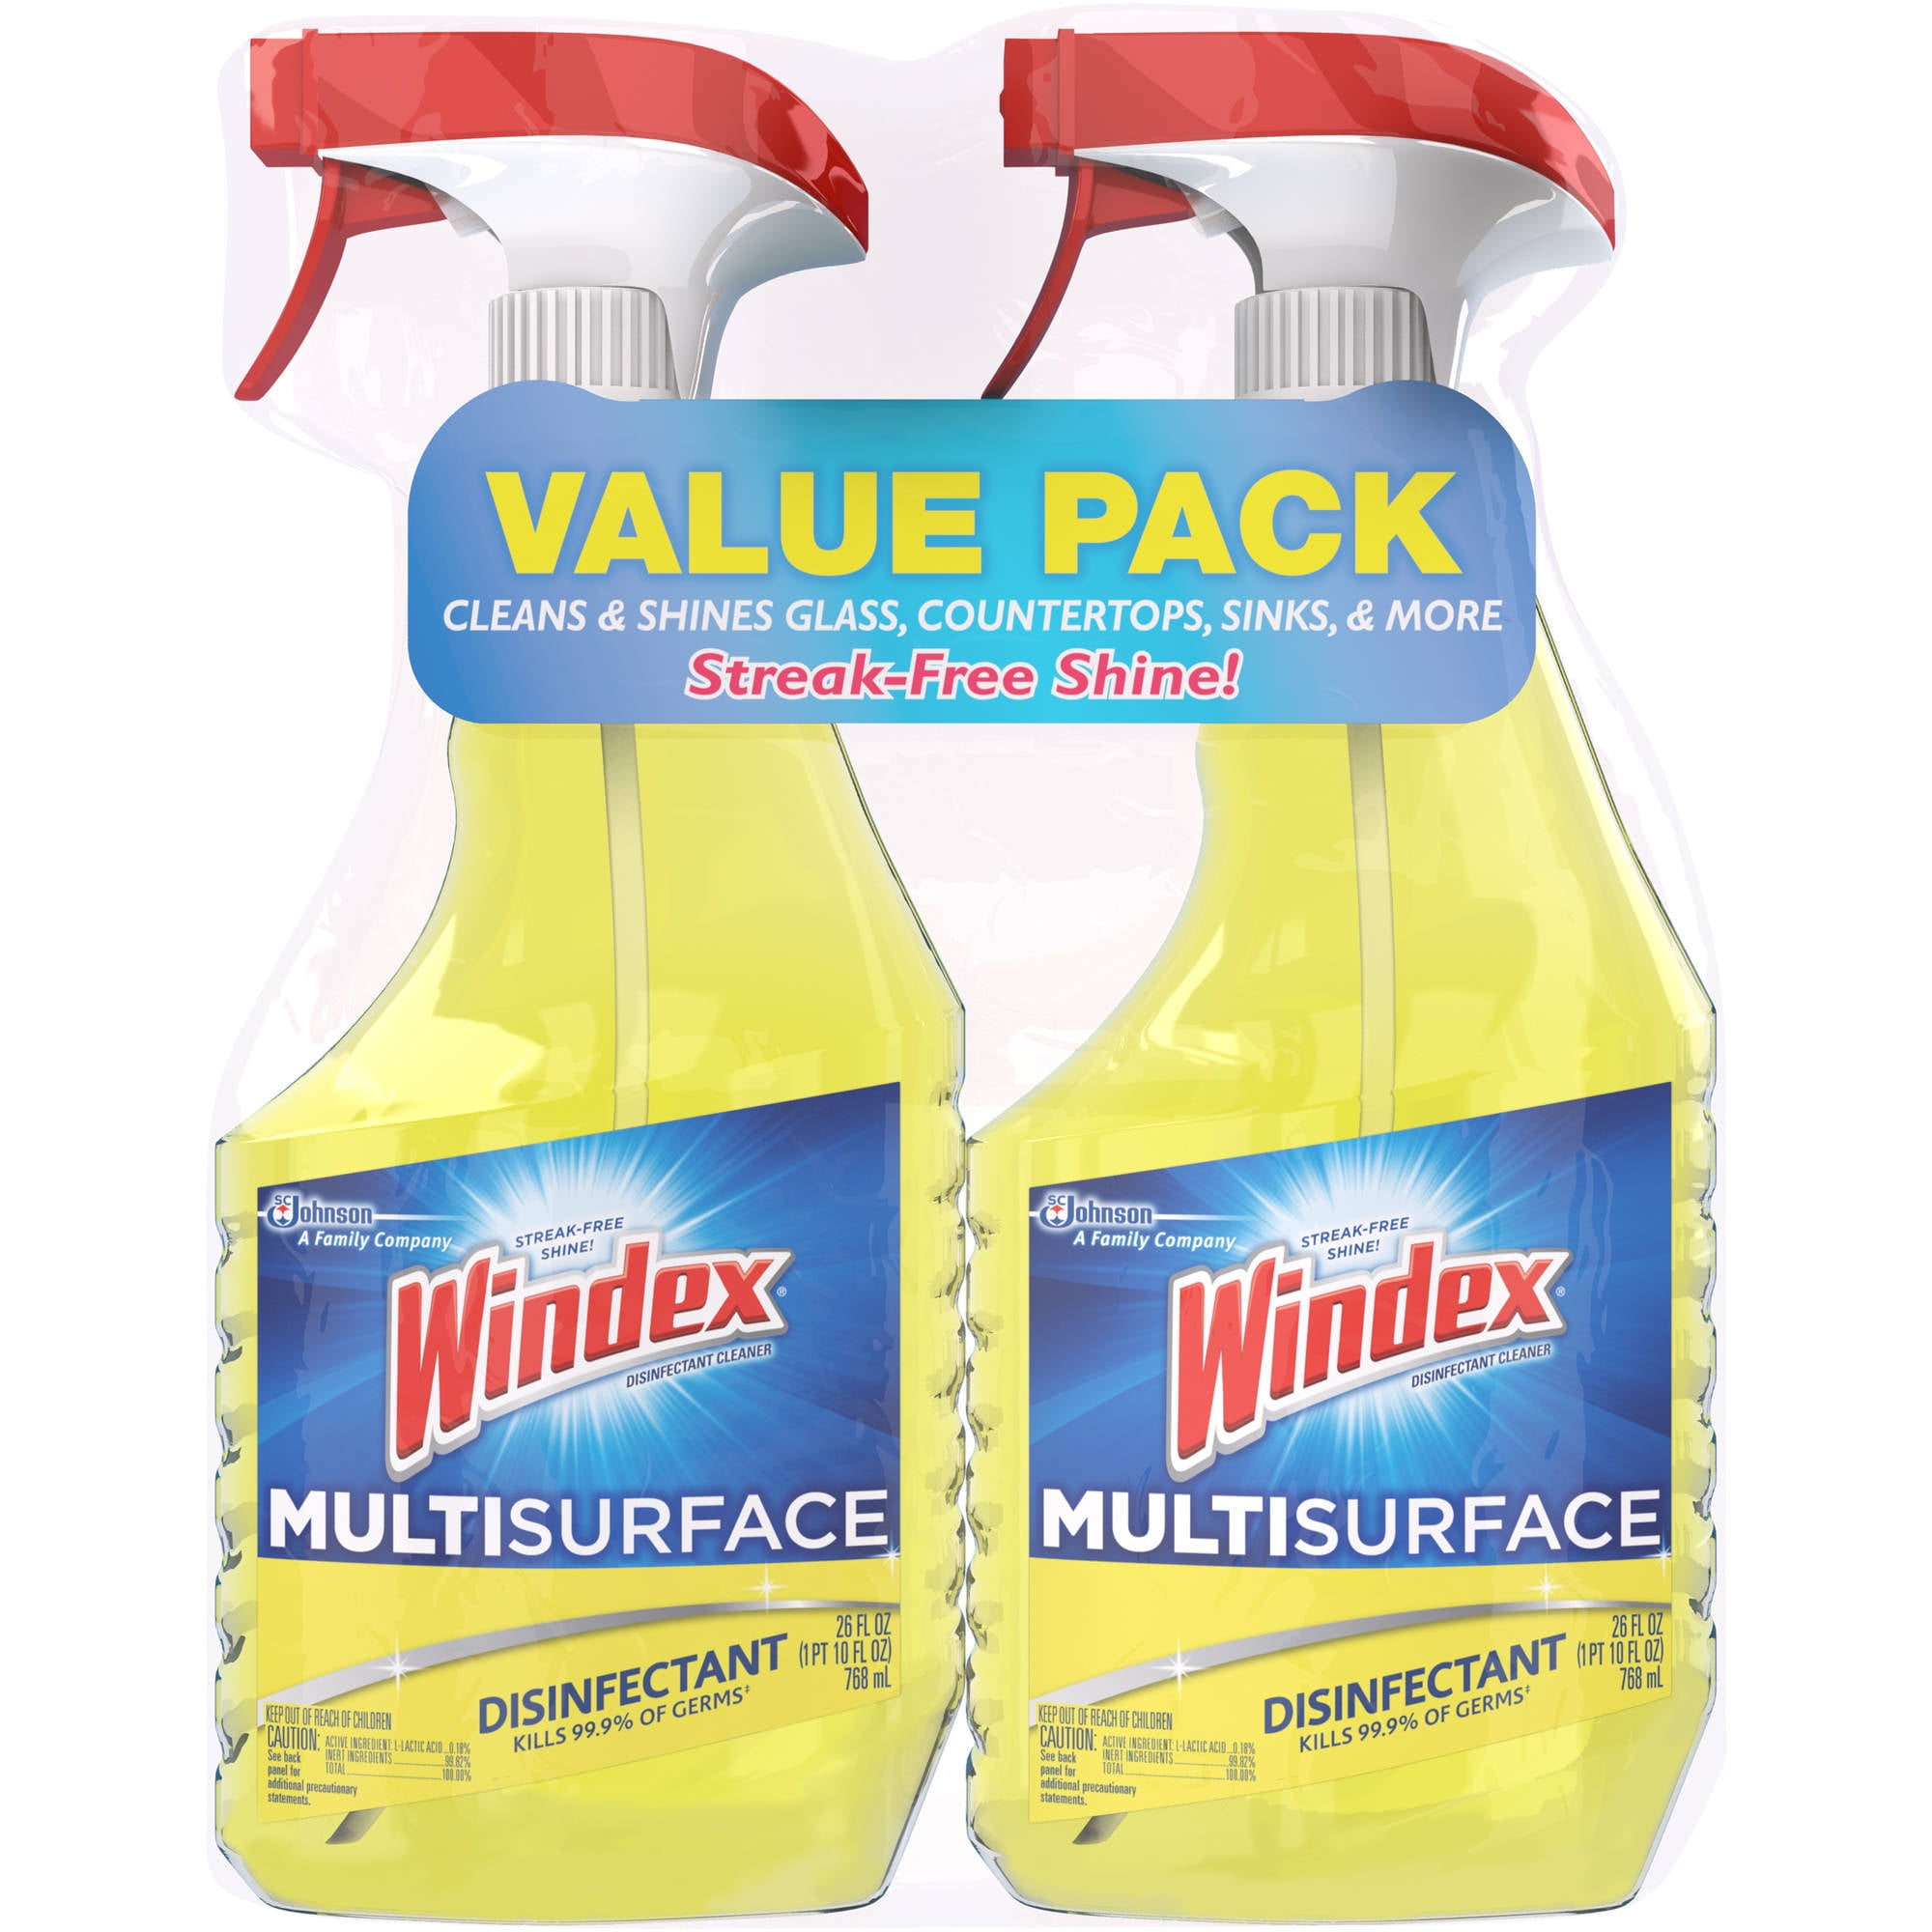 Windex Multi-Surface Disinfectant Cleaner Only $1.94 Shipped on